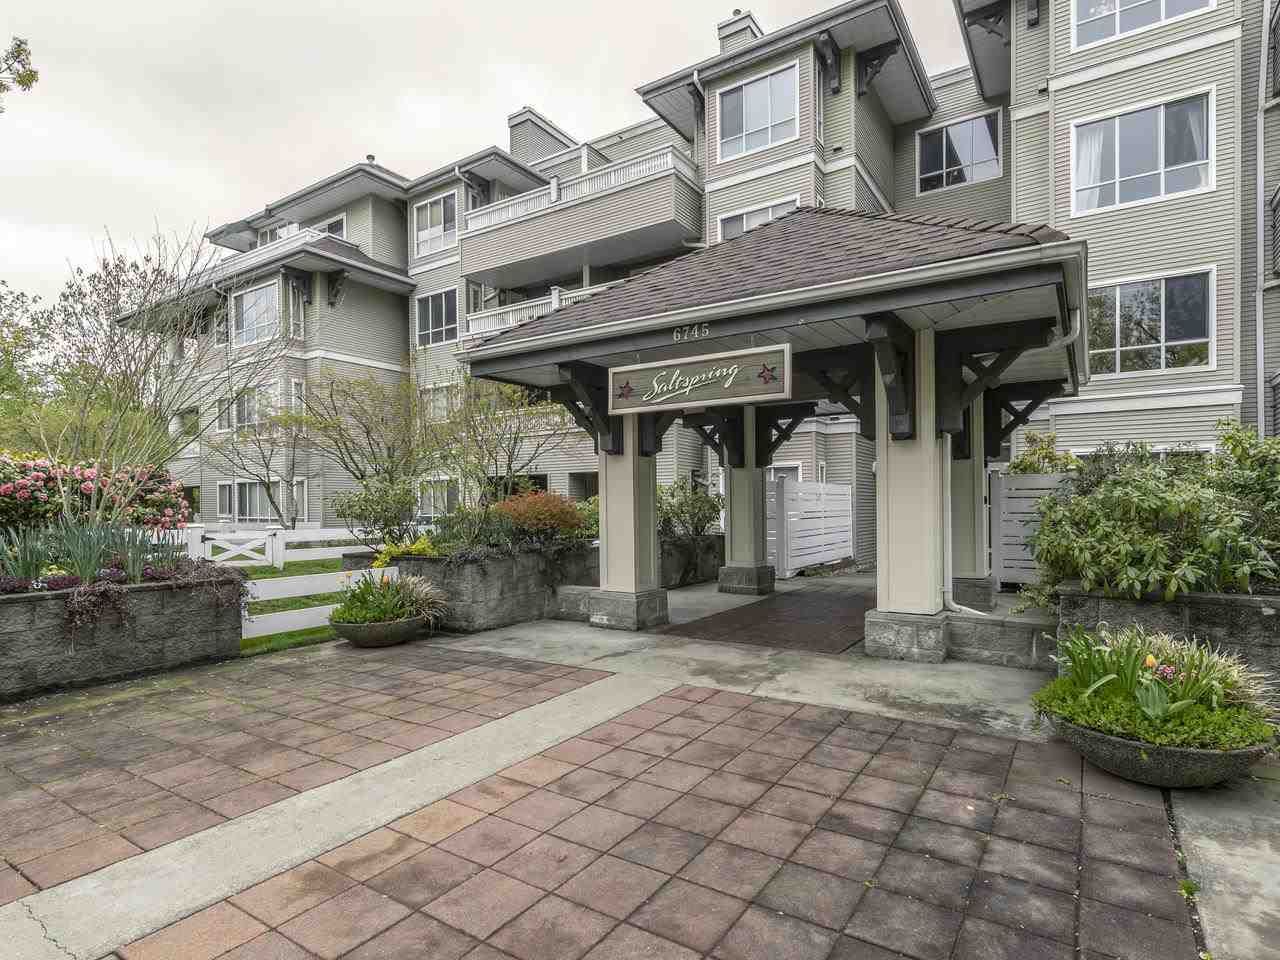 Main Photo: 404 6745 STATION HILL COURT in Burnaby: South Slope Condo for sale (Burnaby South)  : MLS®# R2445660